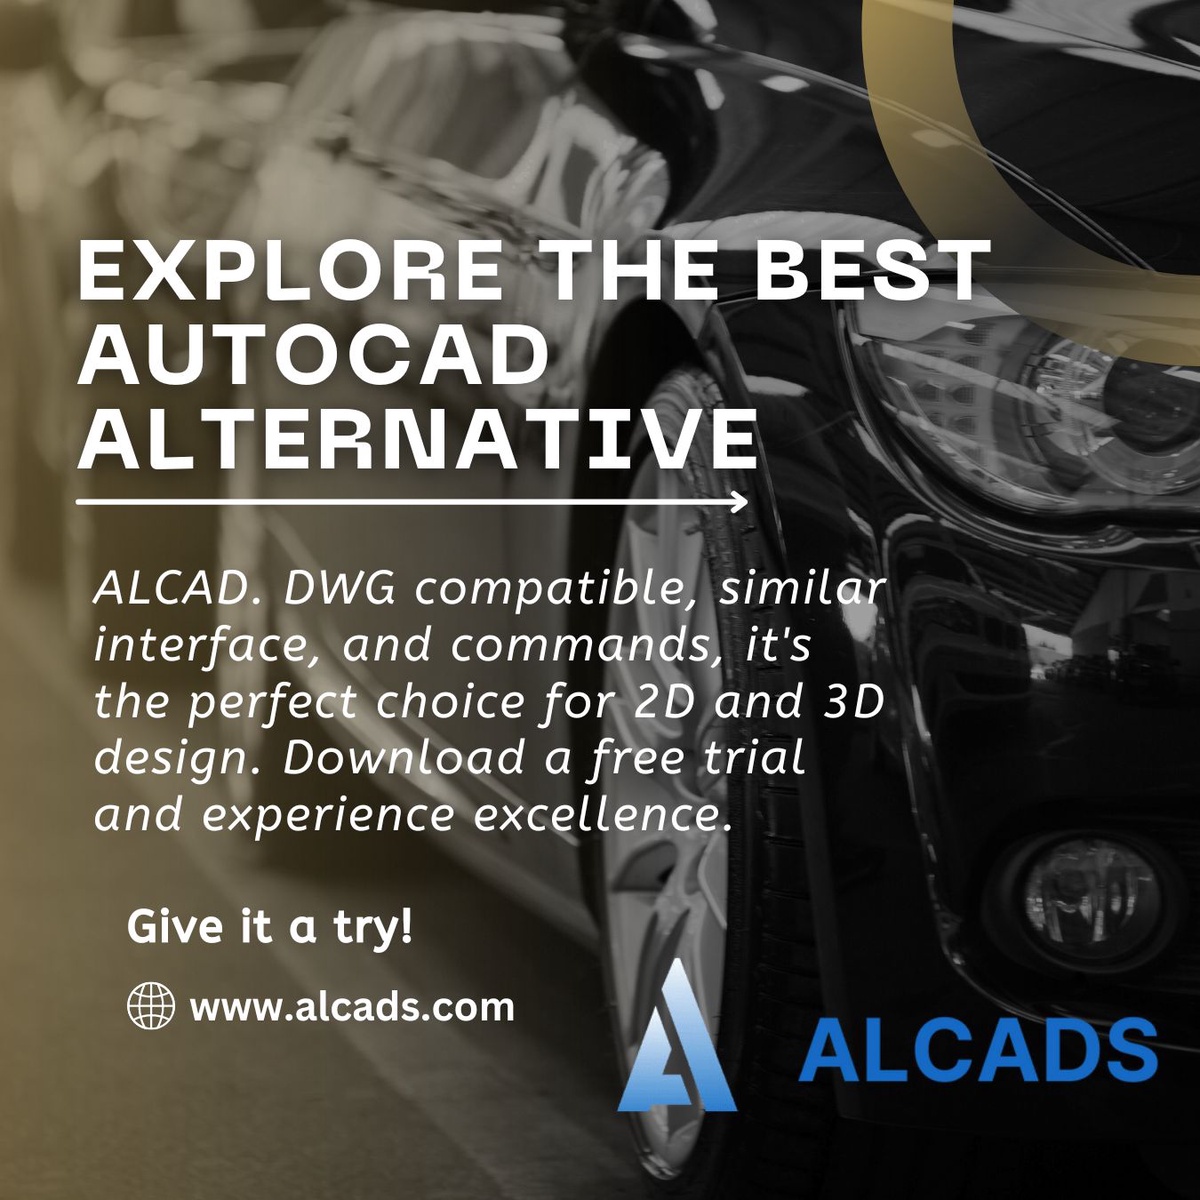 ALCAD – Redefining Design with Affordable Precision